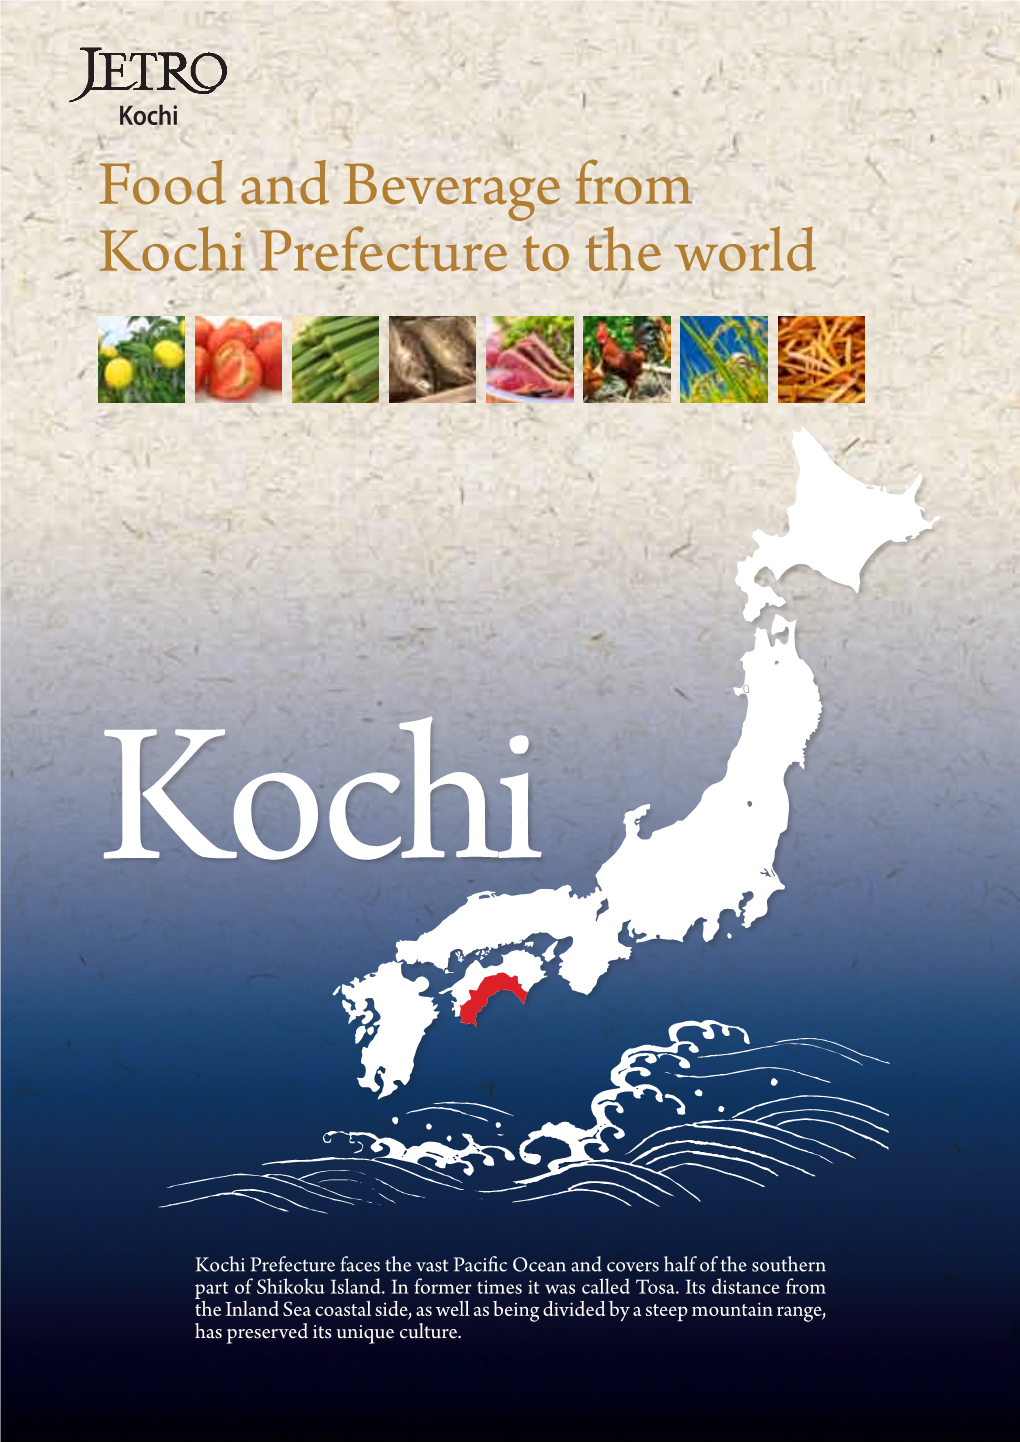 Food and Beverage from Kochi Prefecture to the World